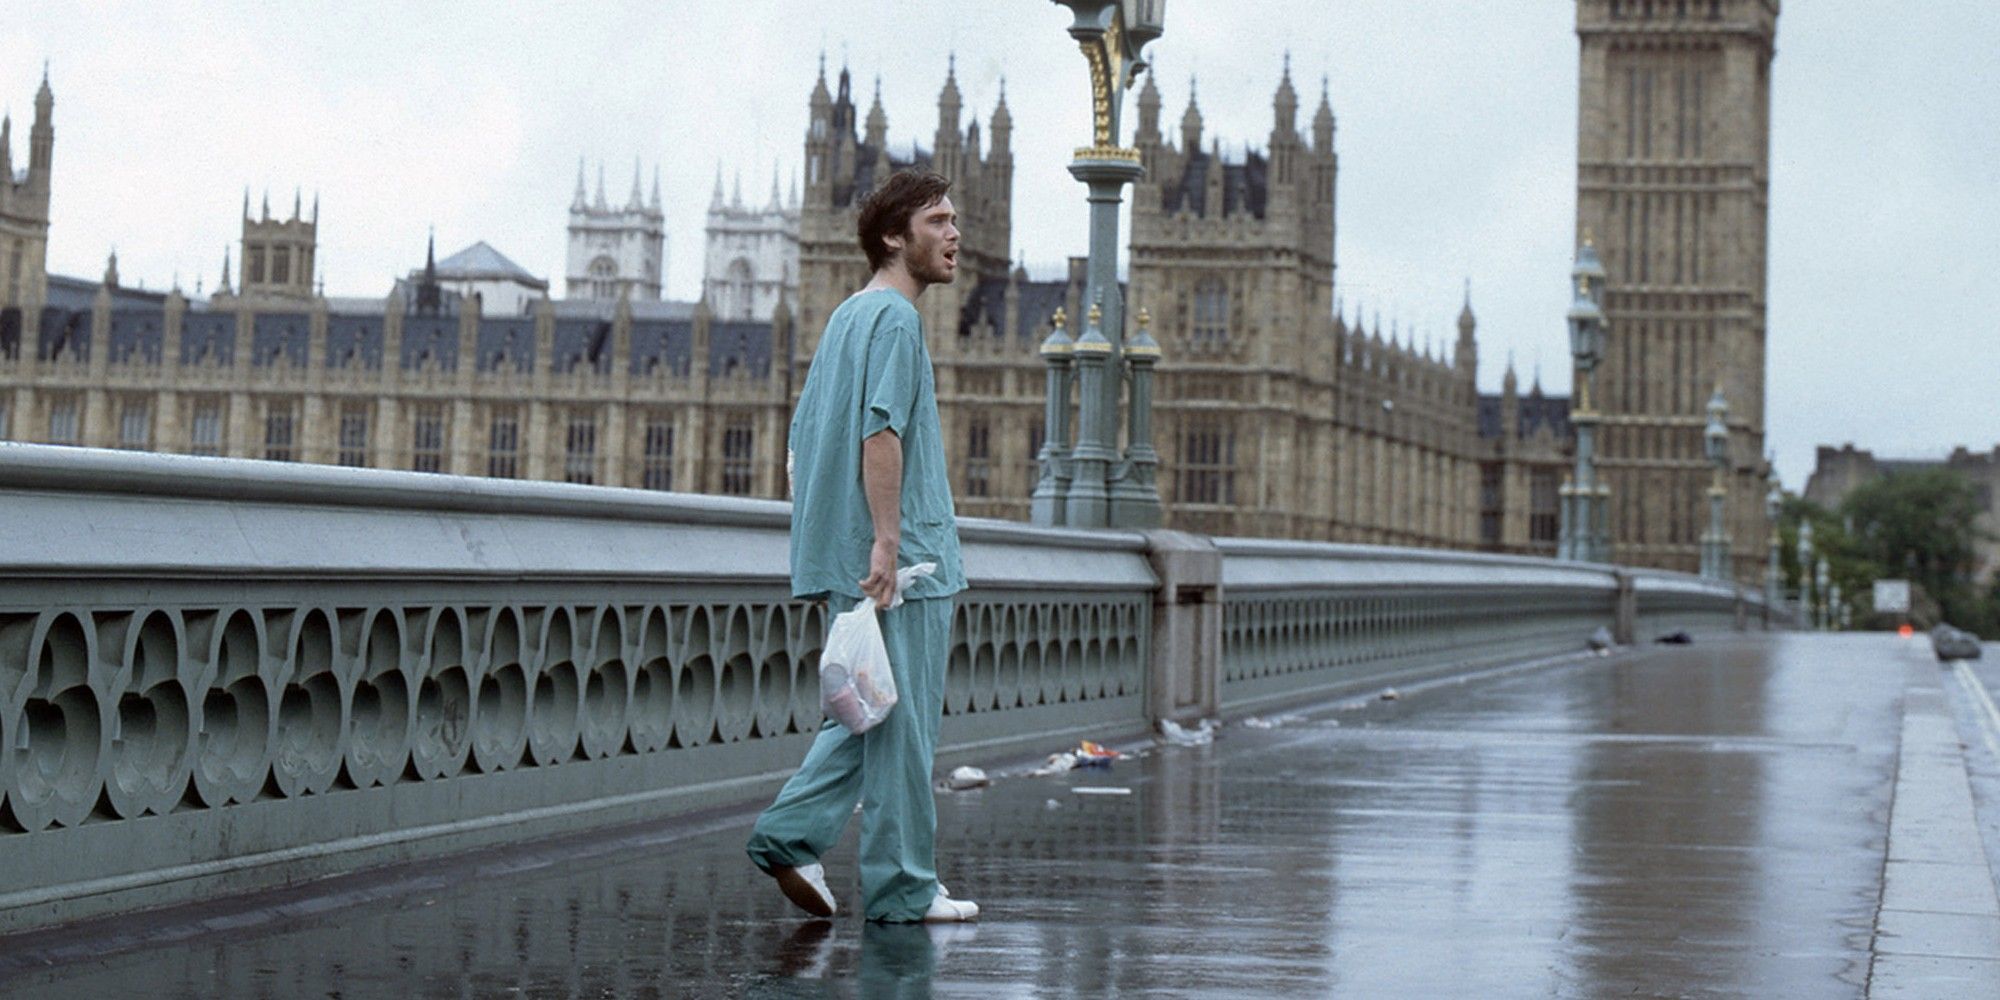 28 Days Later... Cillian Murphy's character next to Big Ben in London